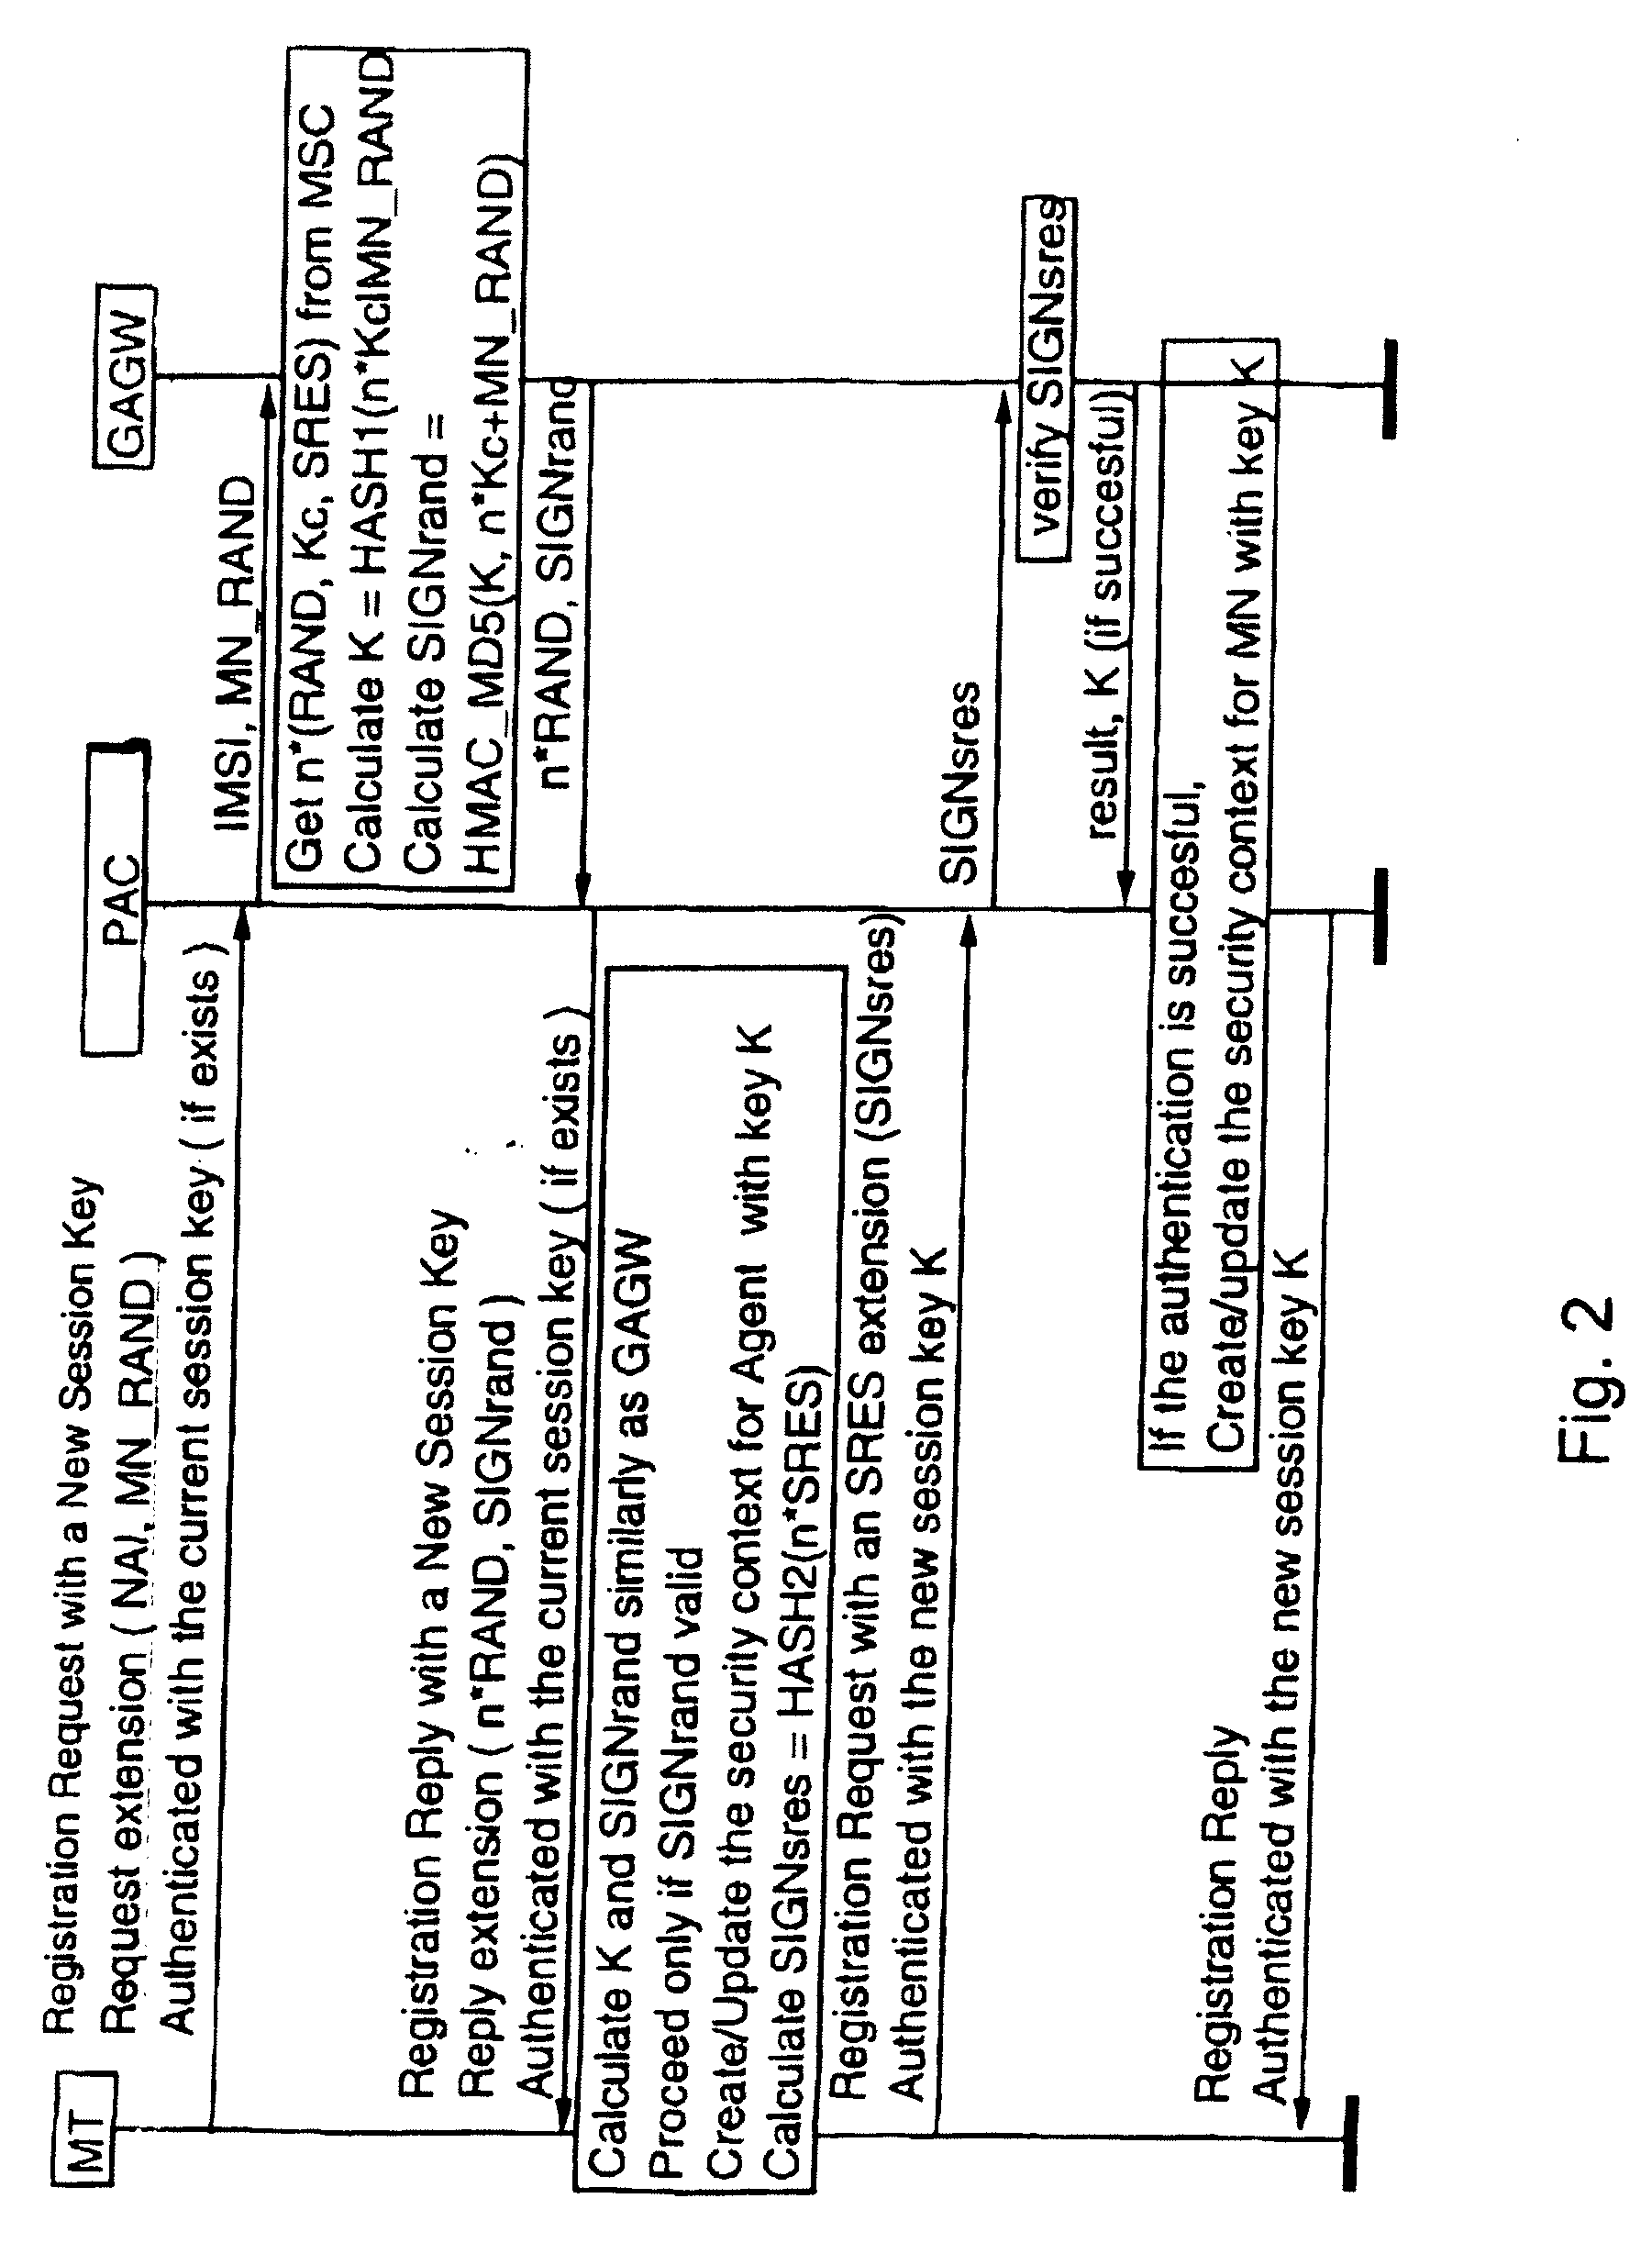 Authentication in a packet data network